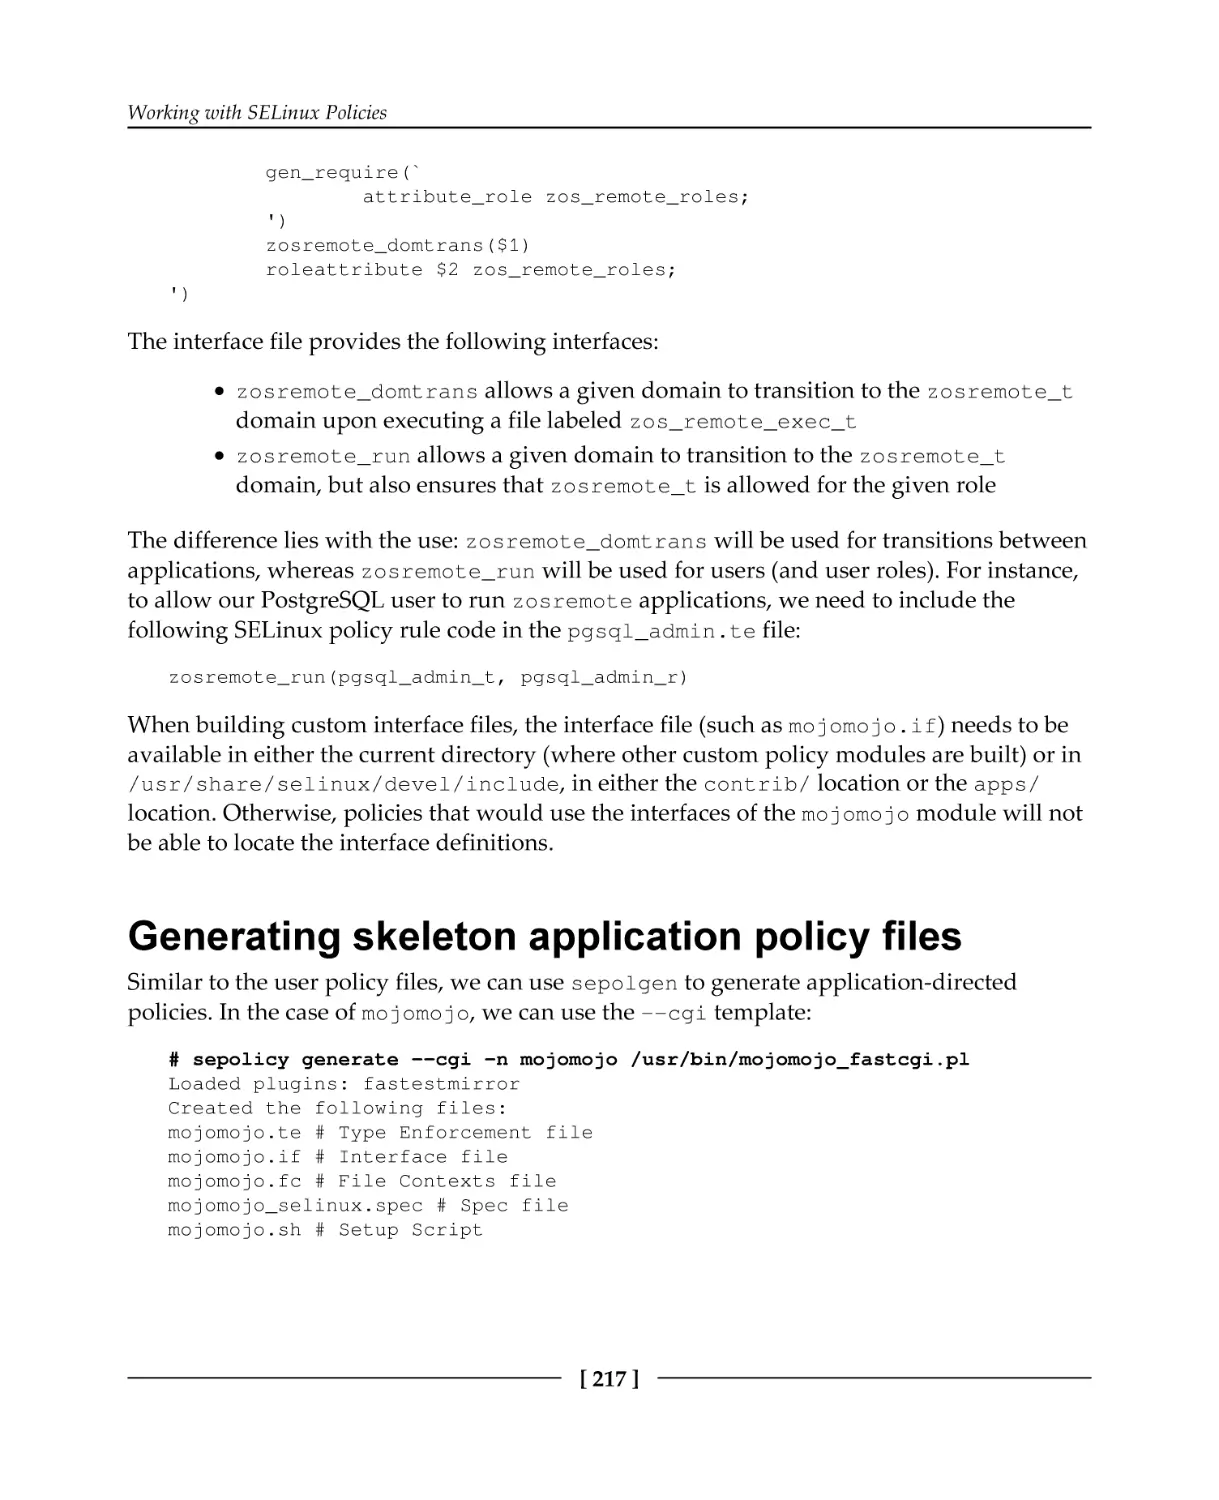 Generating skeleton application policy files